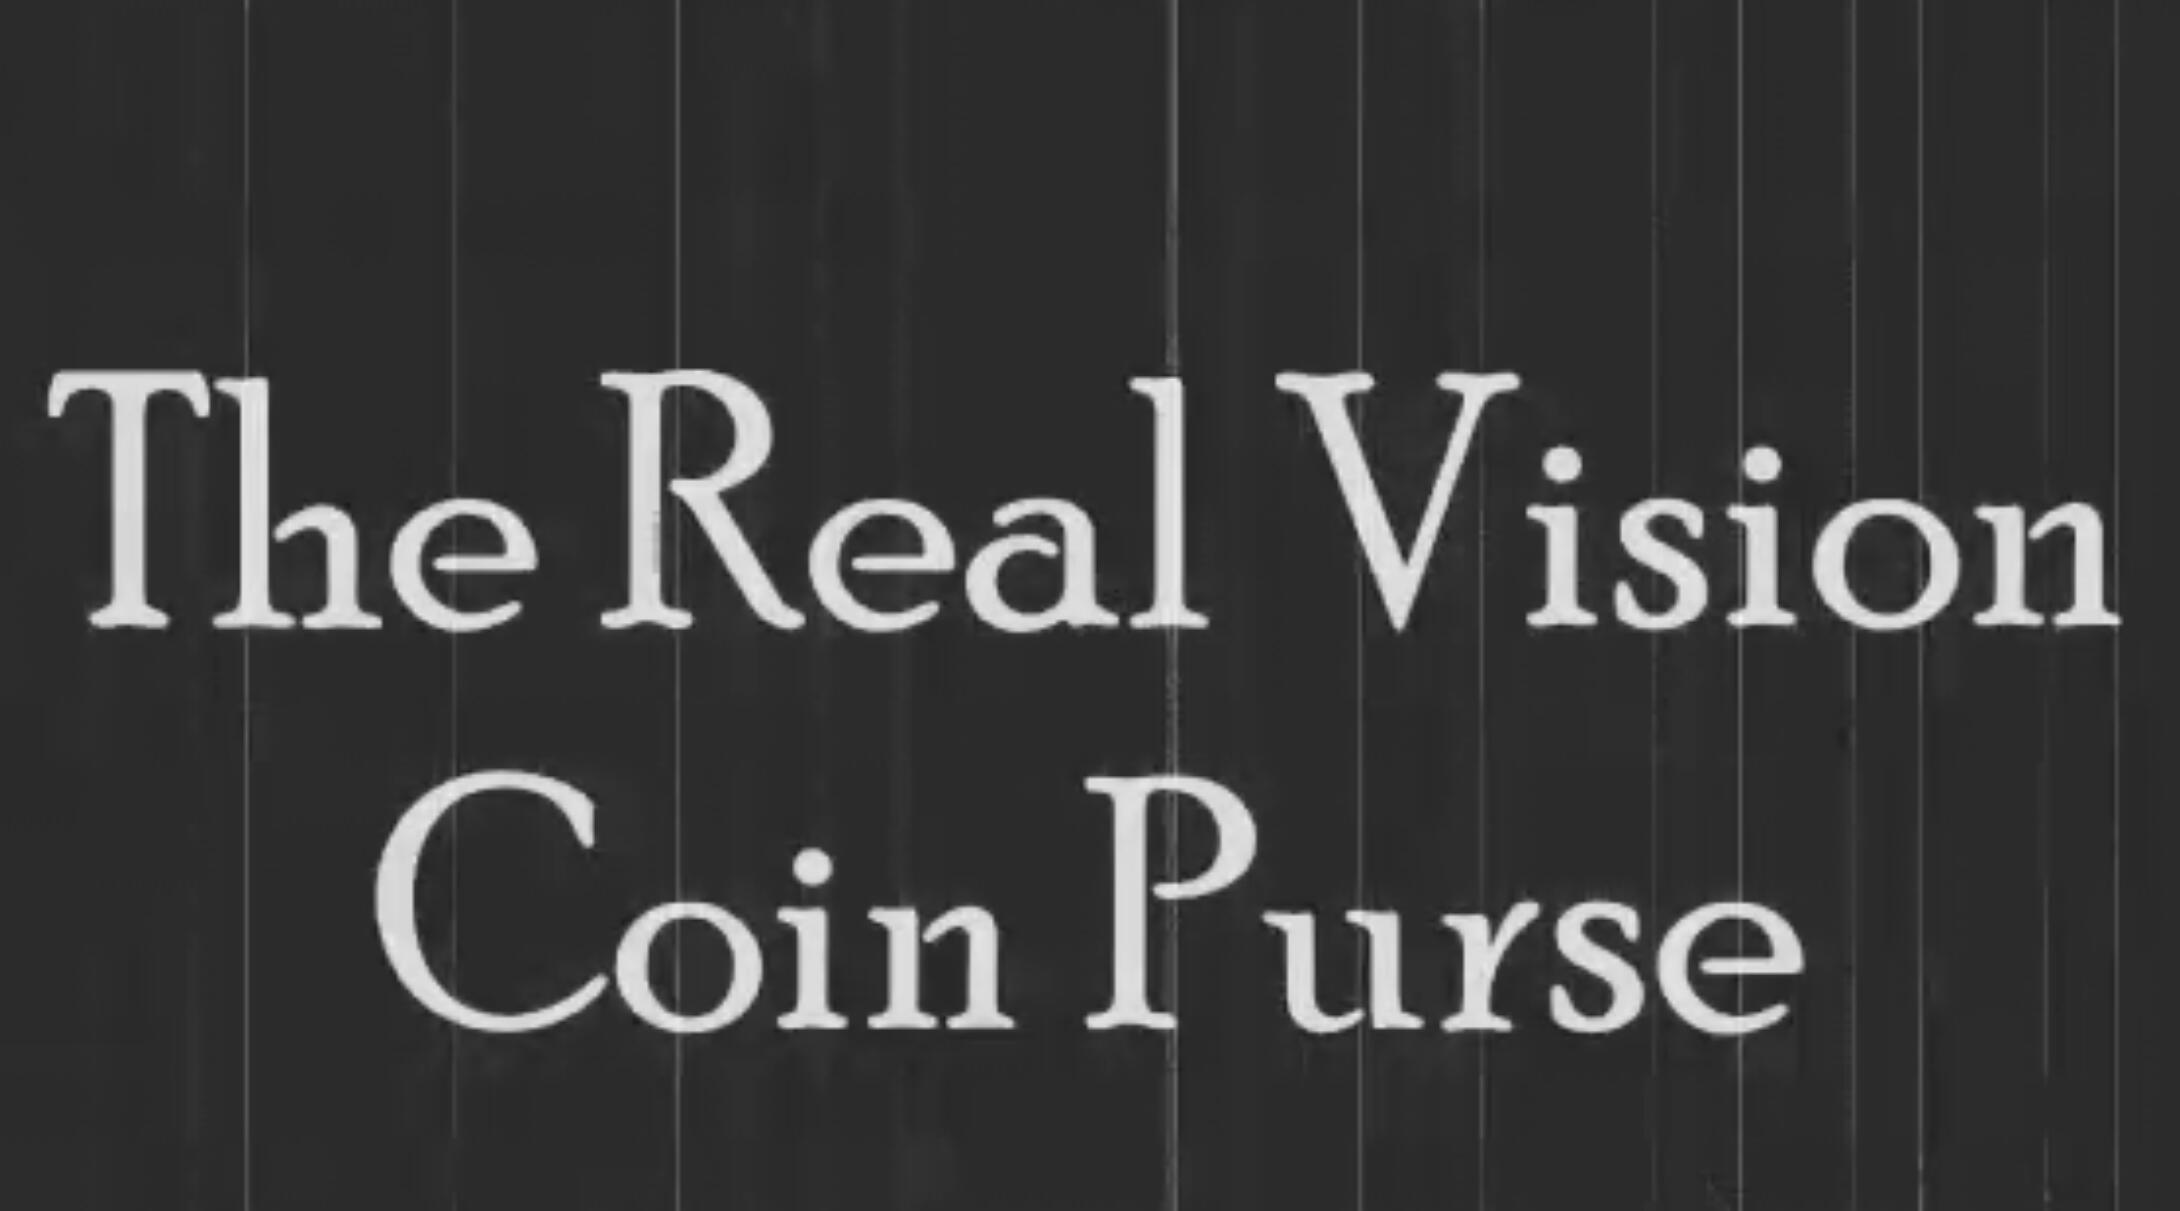 The Real Vision Coin Purse by Airship Magic (Mp4 Video Download)